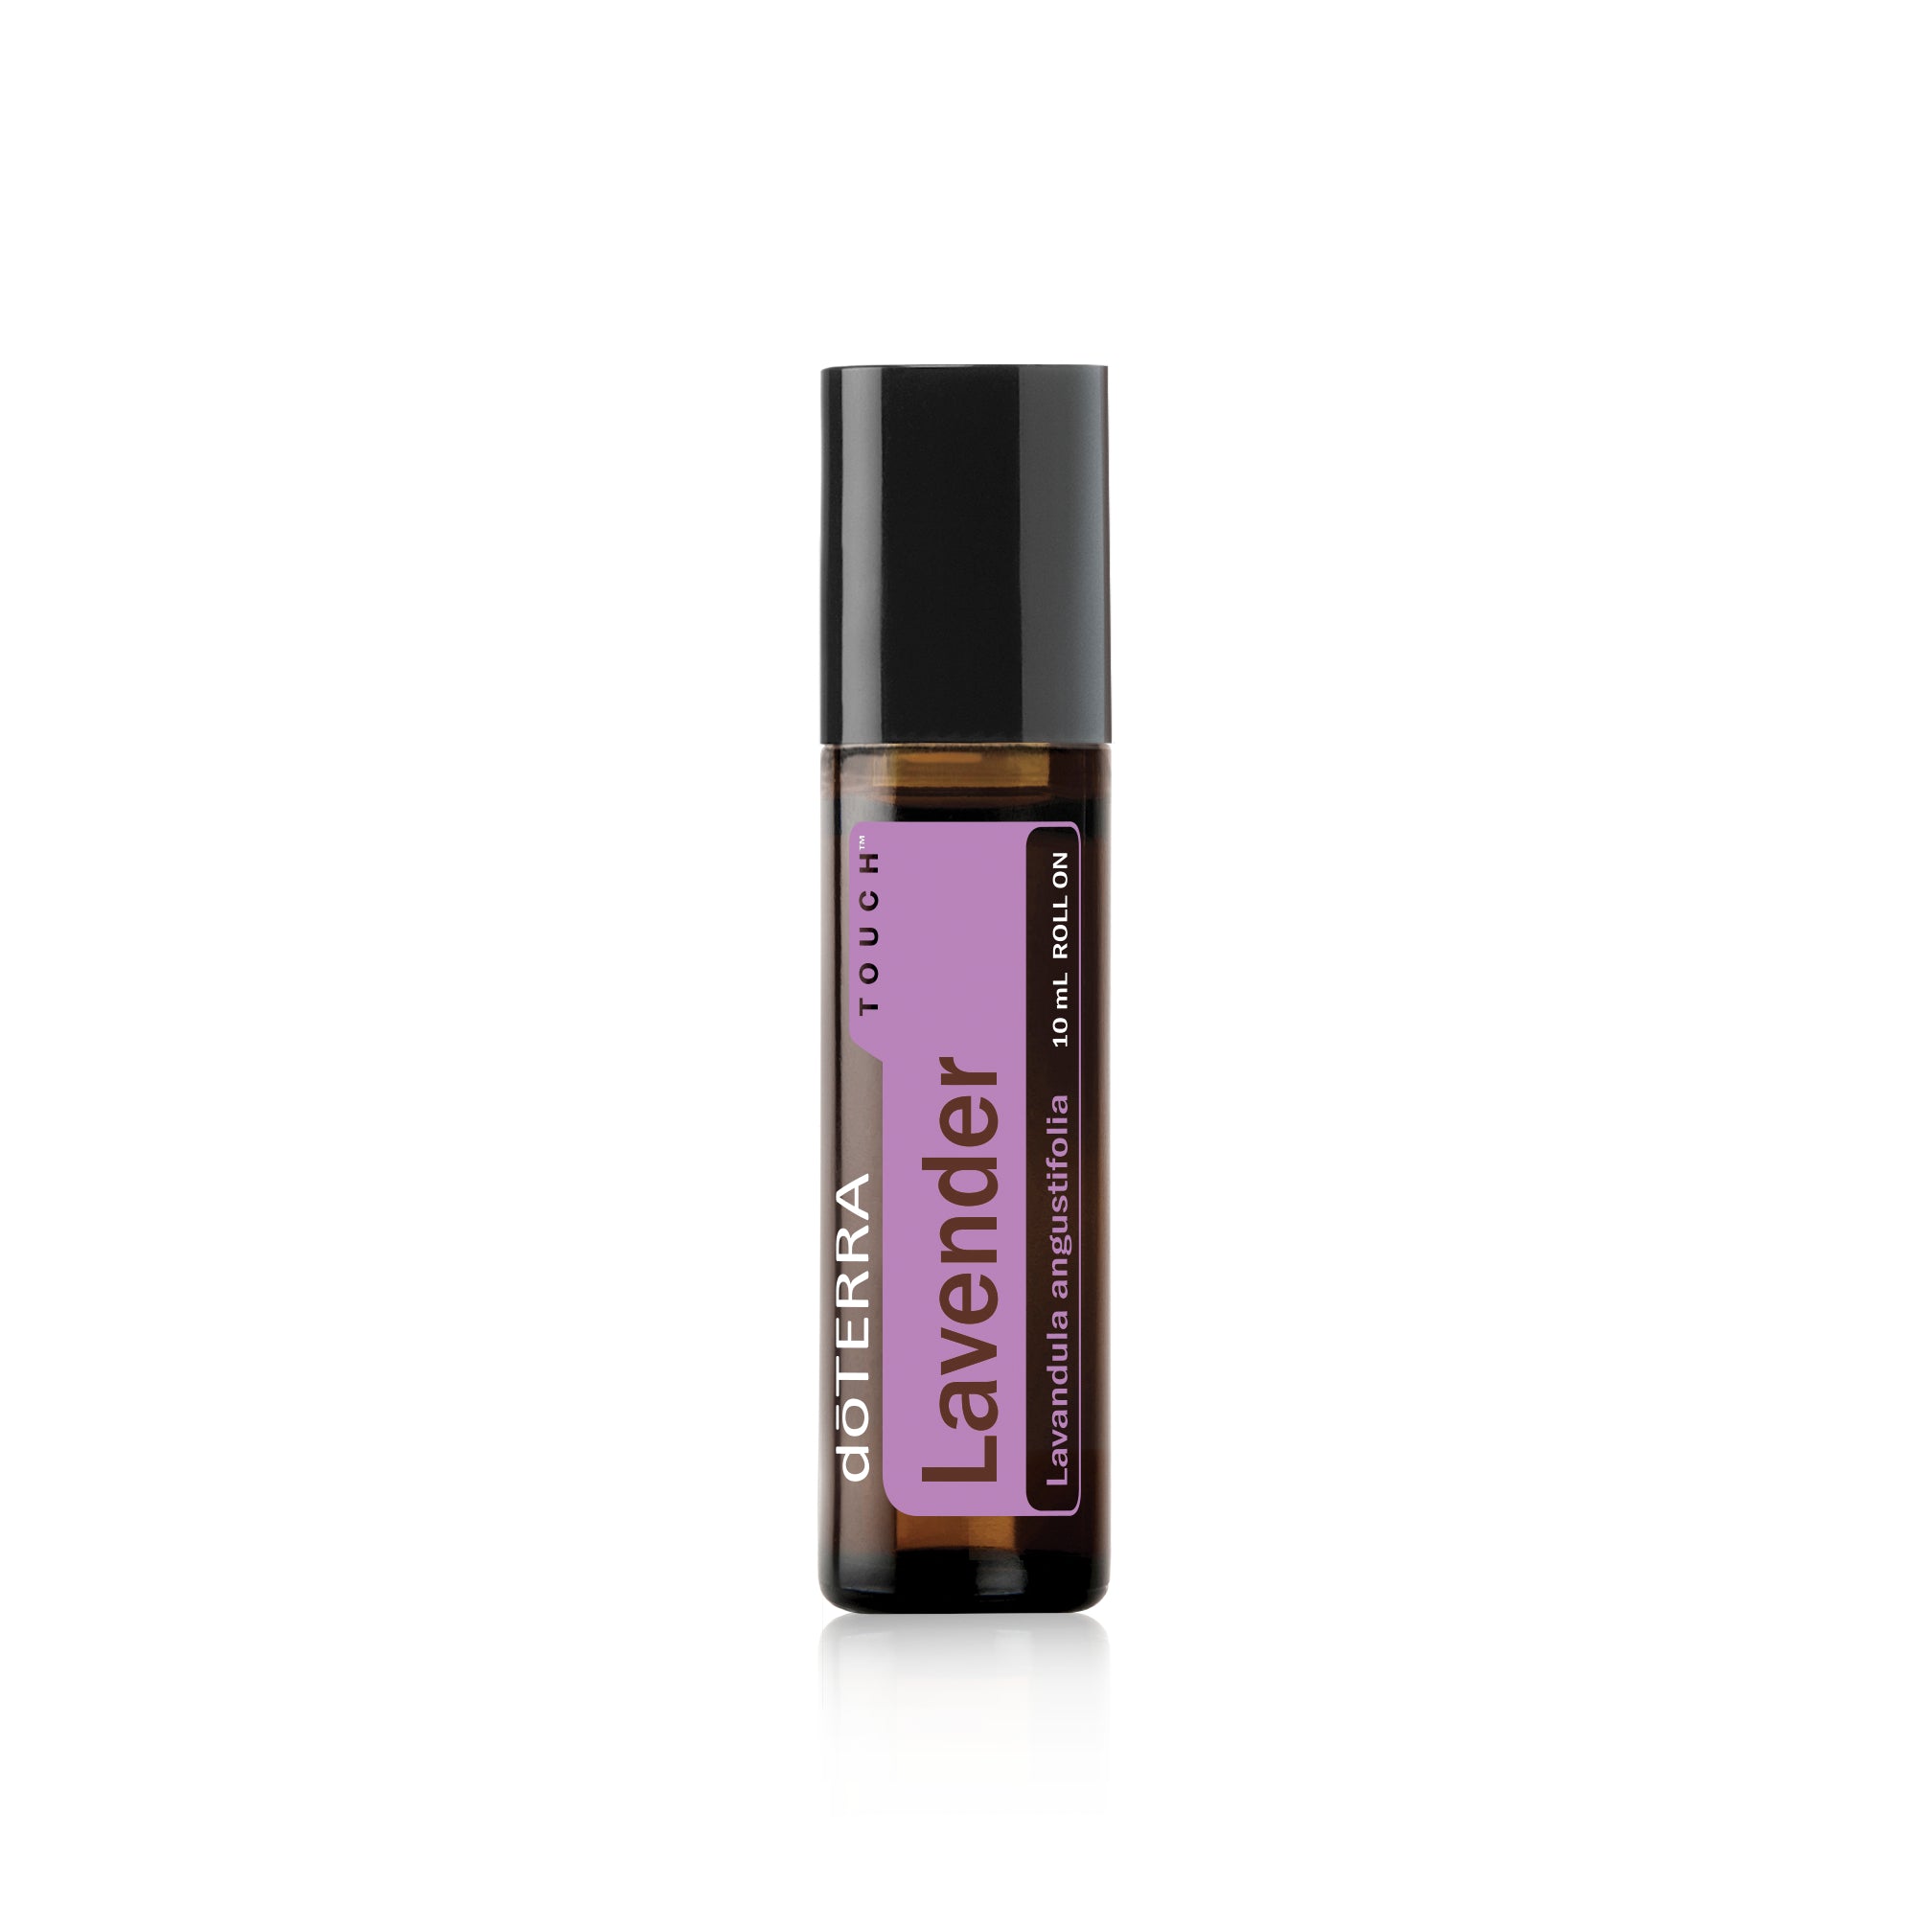 Lavender Touch Essential Oil